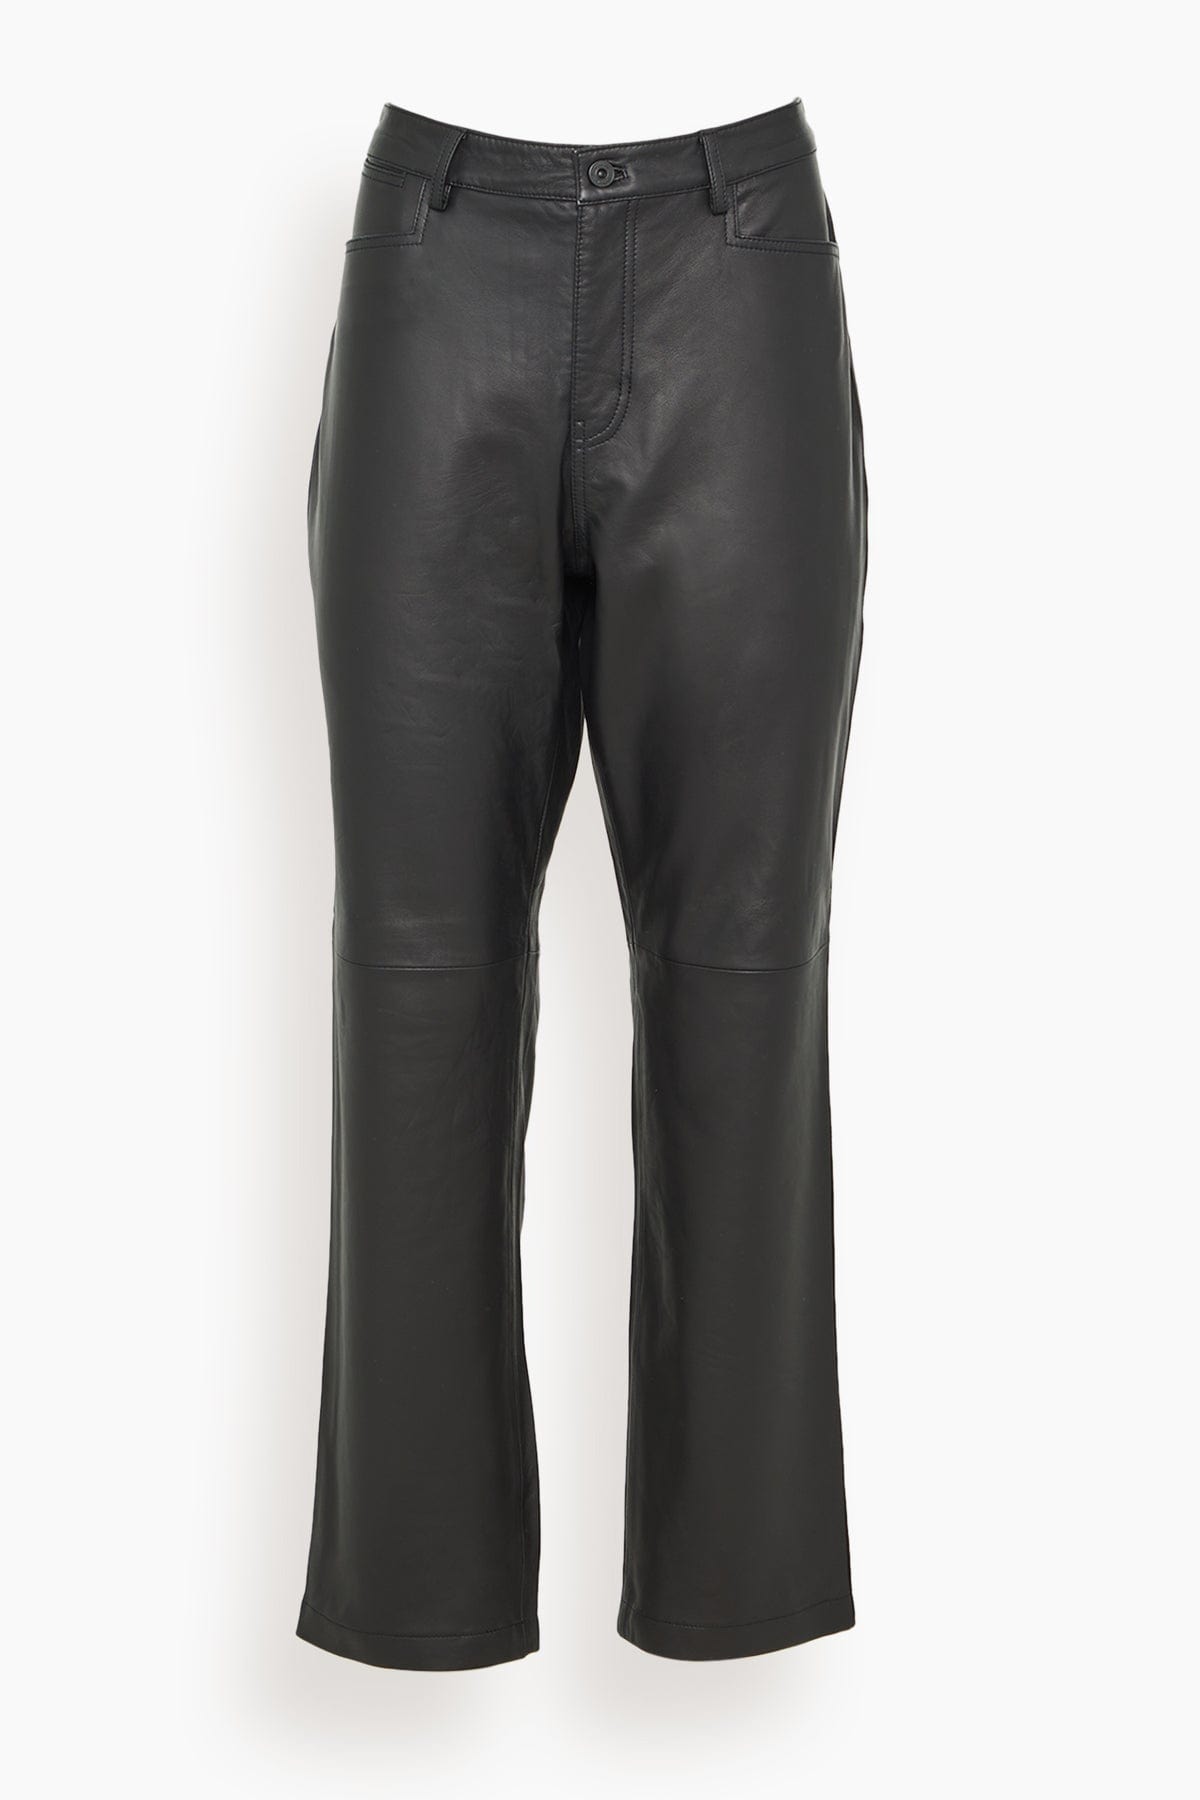 Proenza Schouler White Label Leather Straight Pant in Black - Black - Size: 10